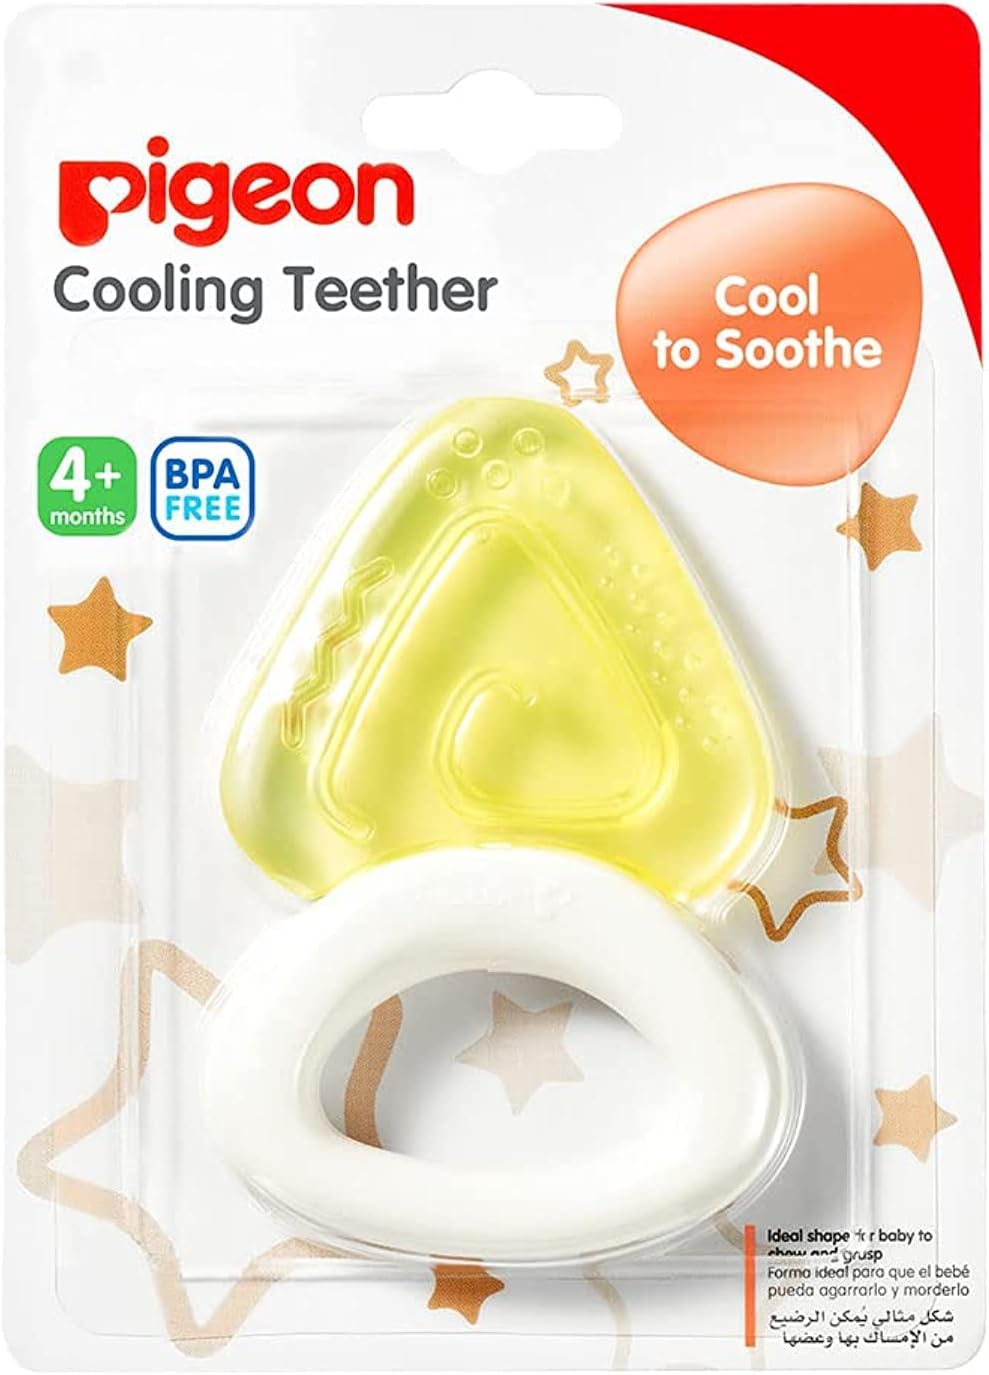 PIGEON COOLING TEETHER TRIANGLE 13897